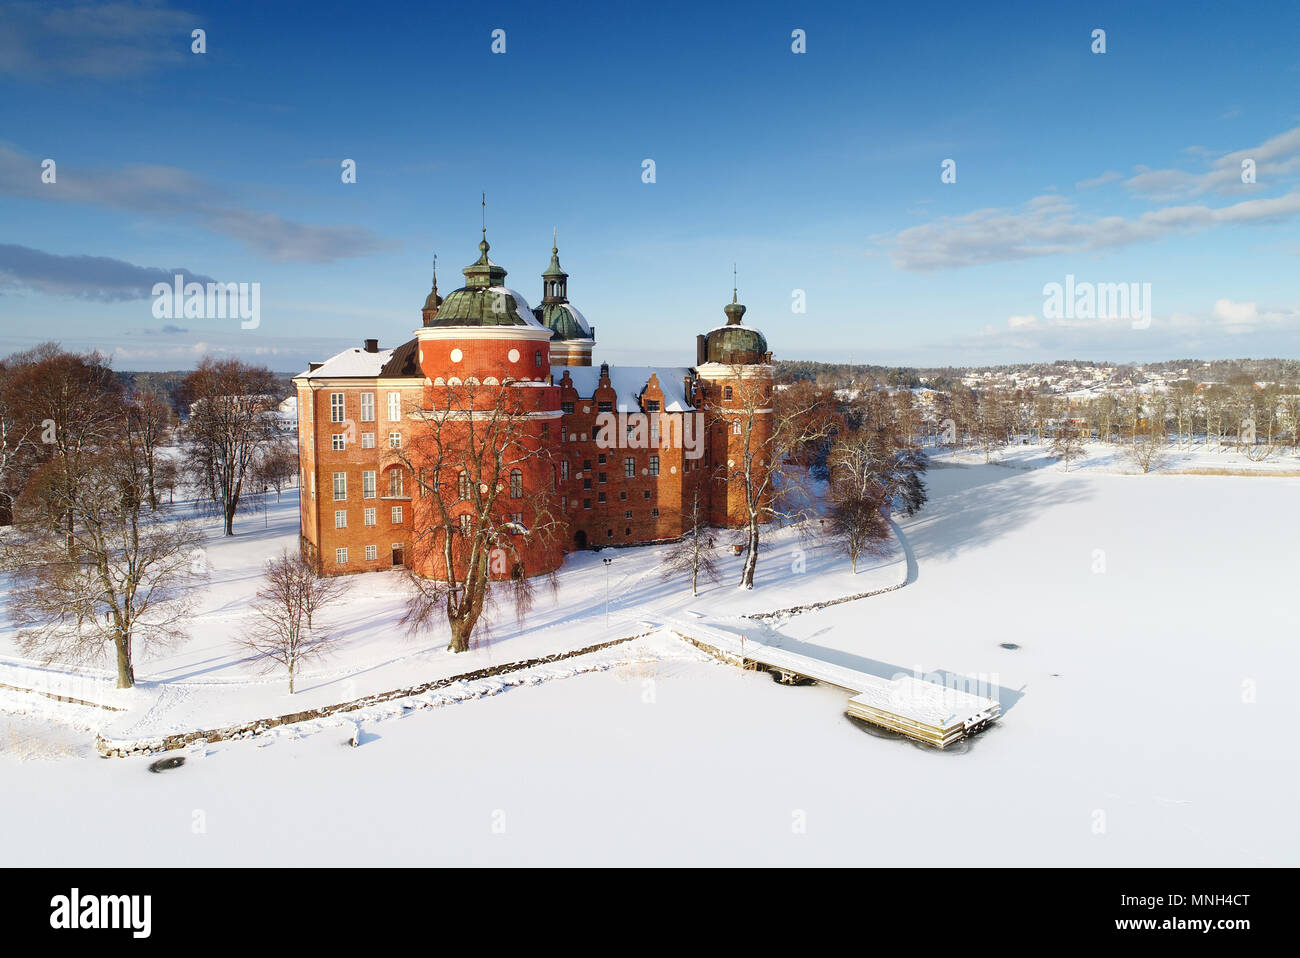 Mariefred, Sweden - Janury 20, 2018: Aerial view of the Gripsholm Castlesurronded by snow during the winter season and located in the town Mariefred,  Stock Photo